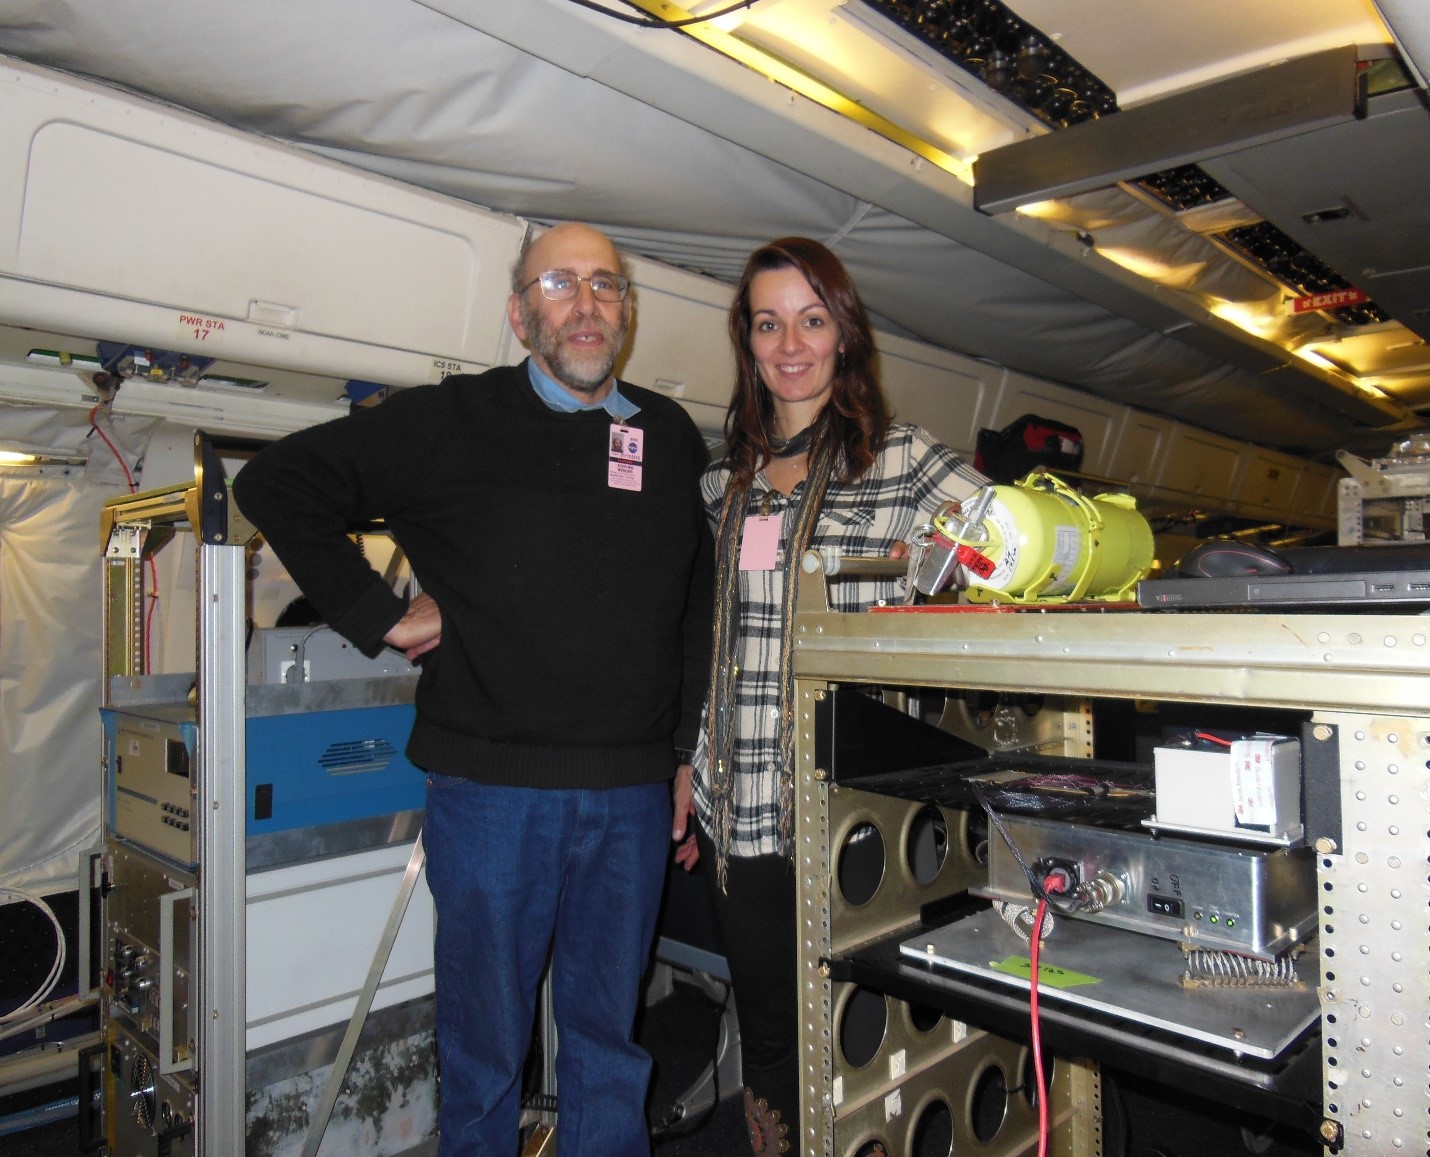 Steve Wender (P-27) and Suzanne Nowicki (ISR-1) are shown in the cabin of a NASA DC-8 aircraft for testing. The Tinman instrument is in the rack with a red ethernet cable connected to it.